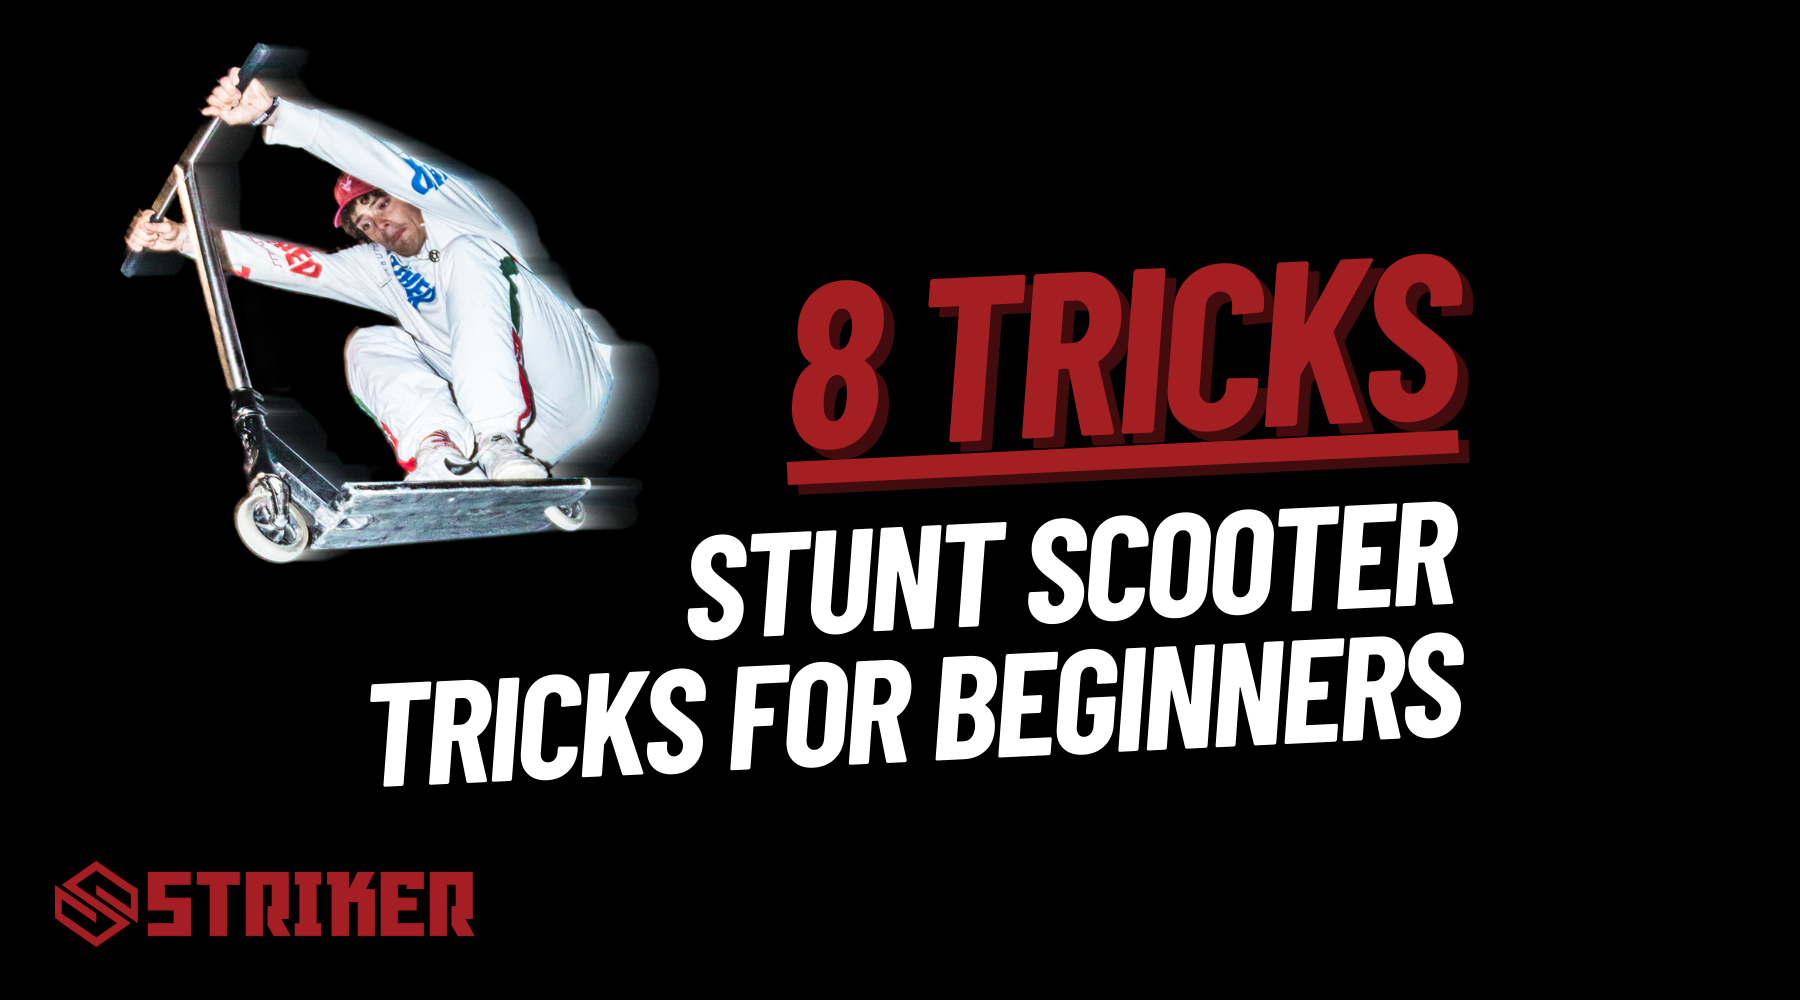 stunt scooter tricks for beginners